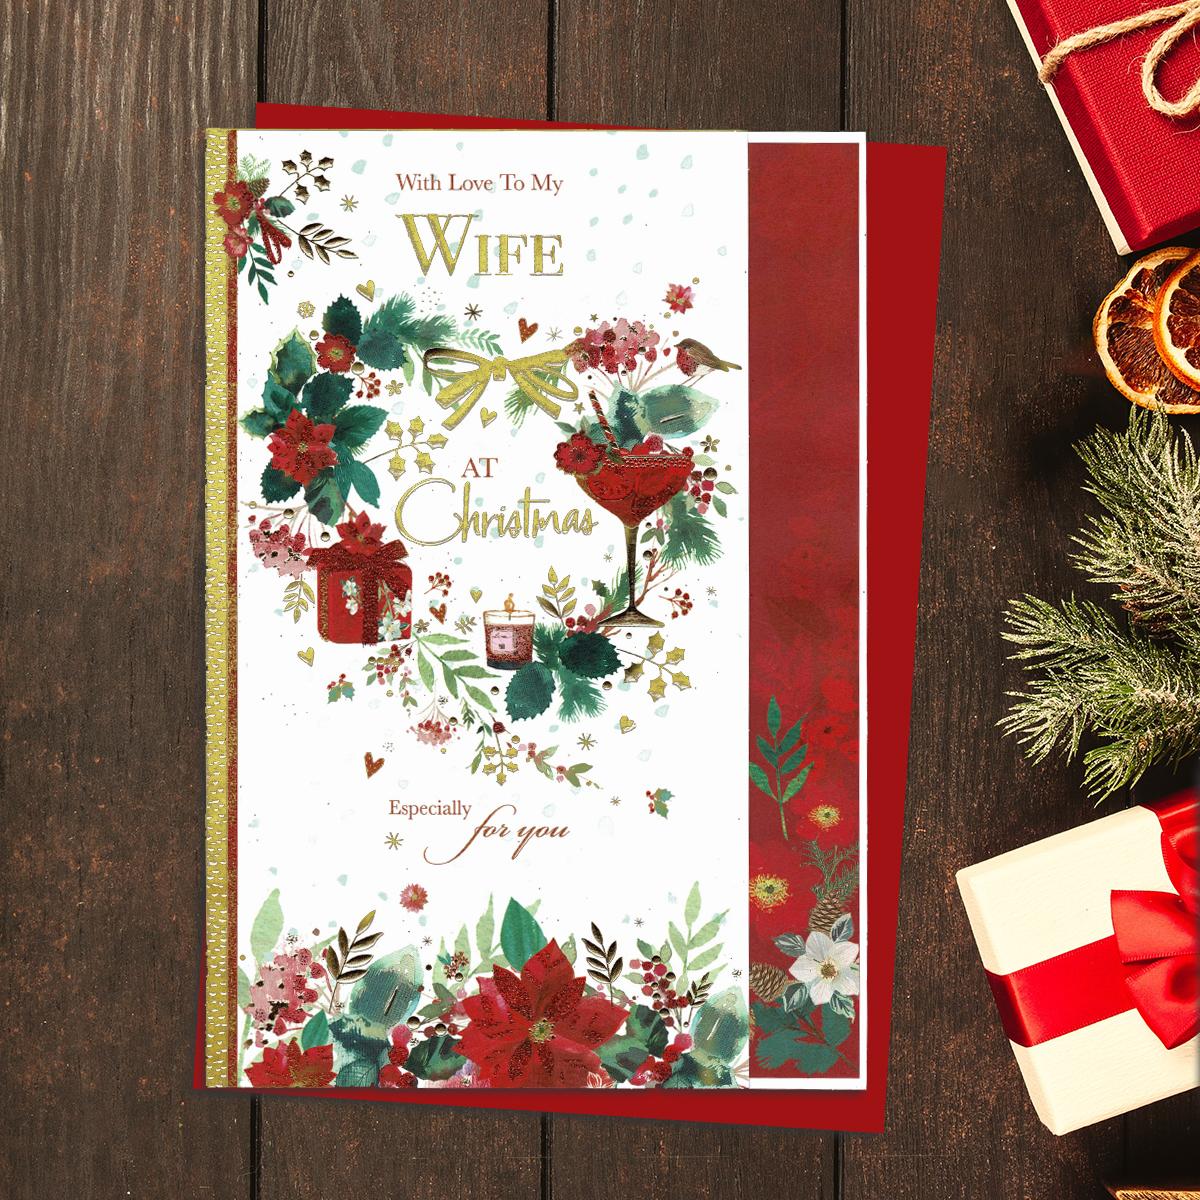 With Love To My Wife At Christmas Especially For You. Floral Christmas Wreath With Gifts ,Champagne Glass and Robin. Gold Foil Lettering And Red Glitter accents. Completed With A Co-Ordinating Red Envelope